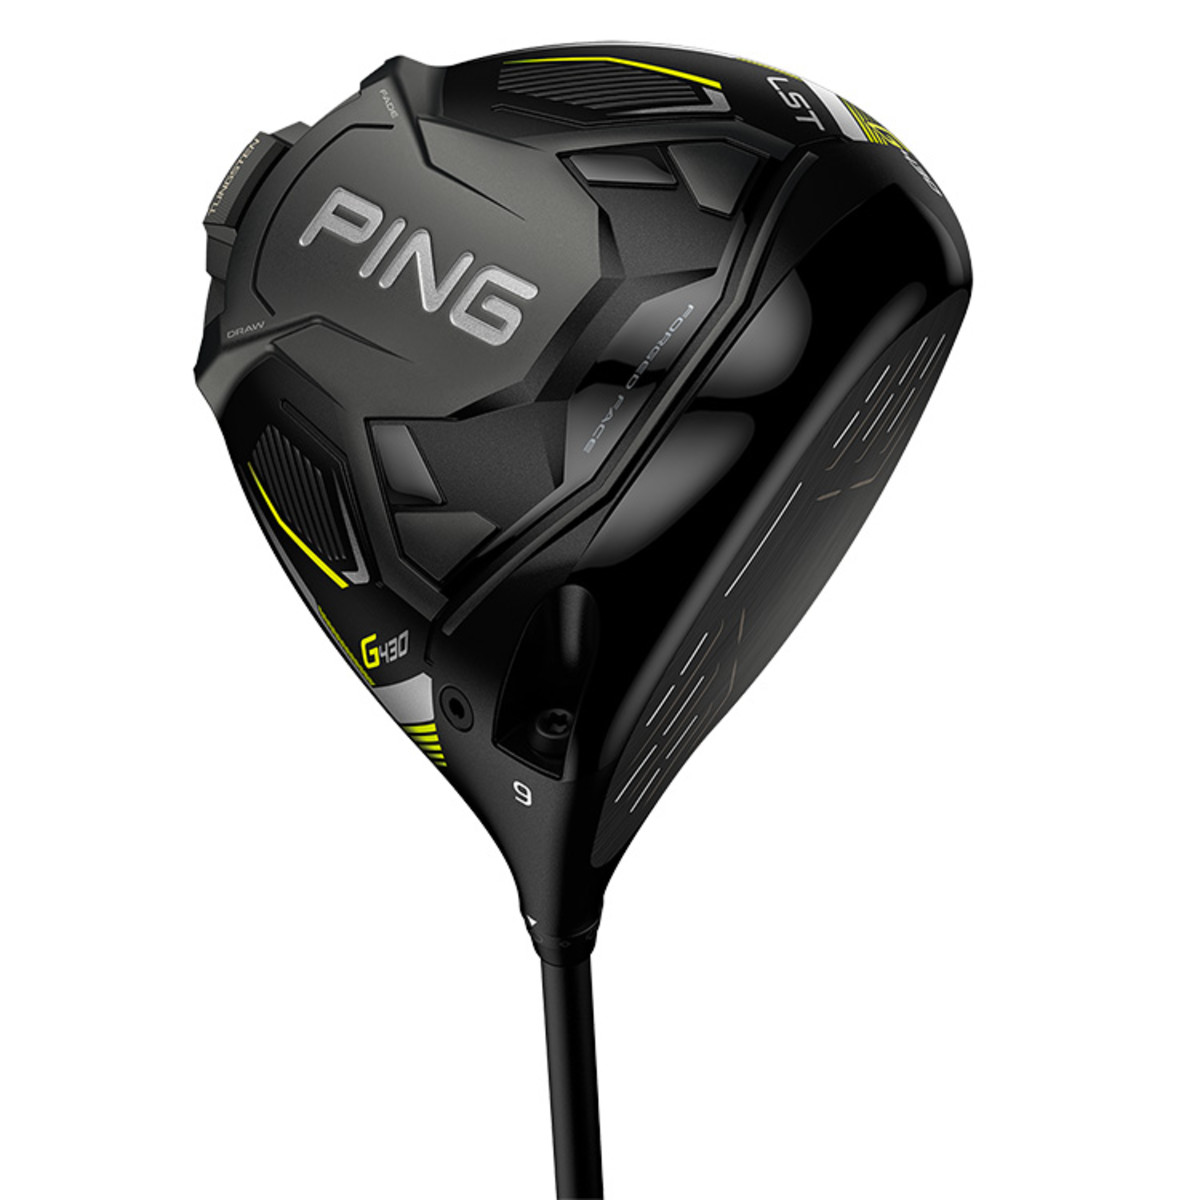 Ping's G430 LST driver